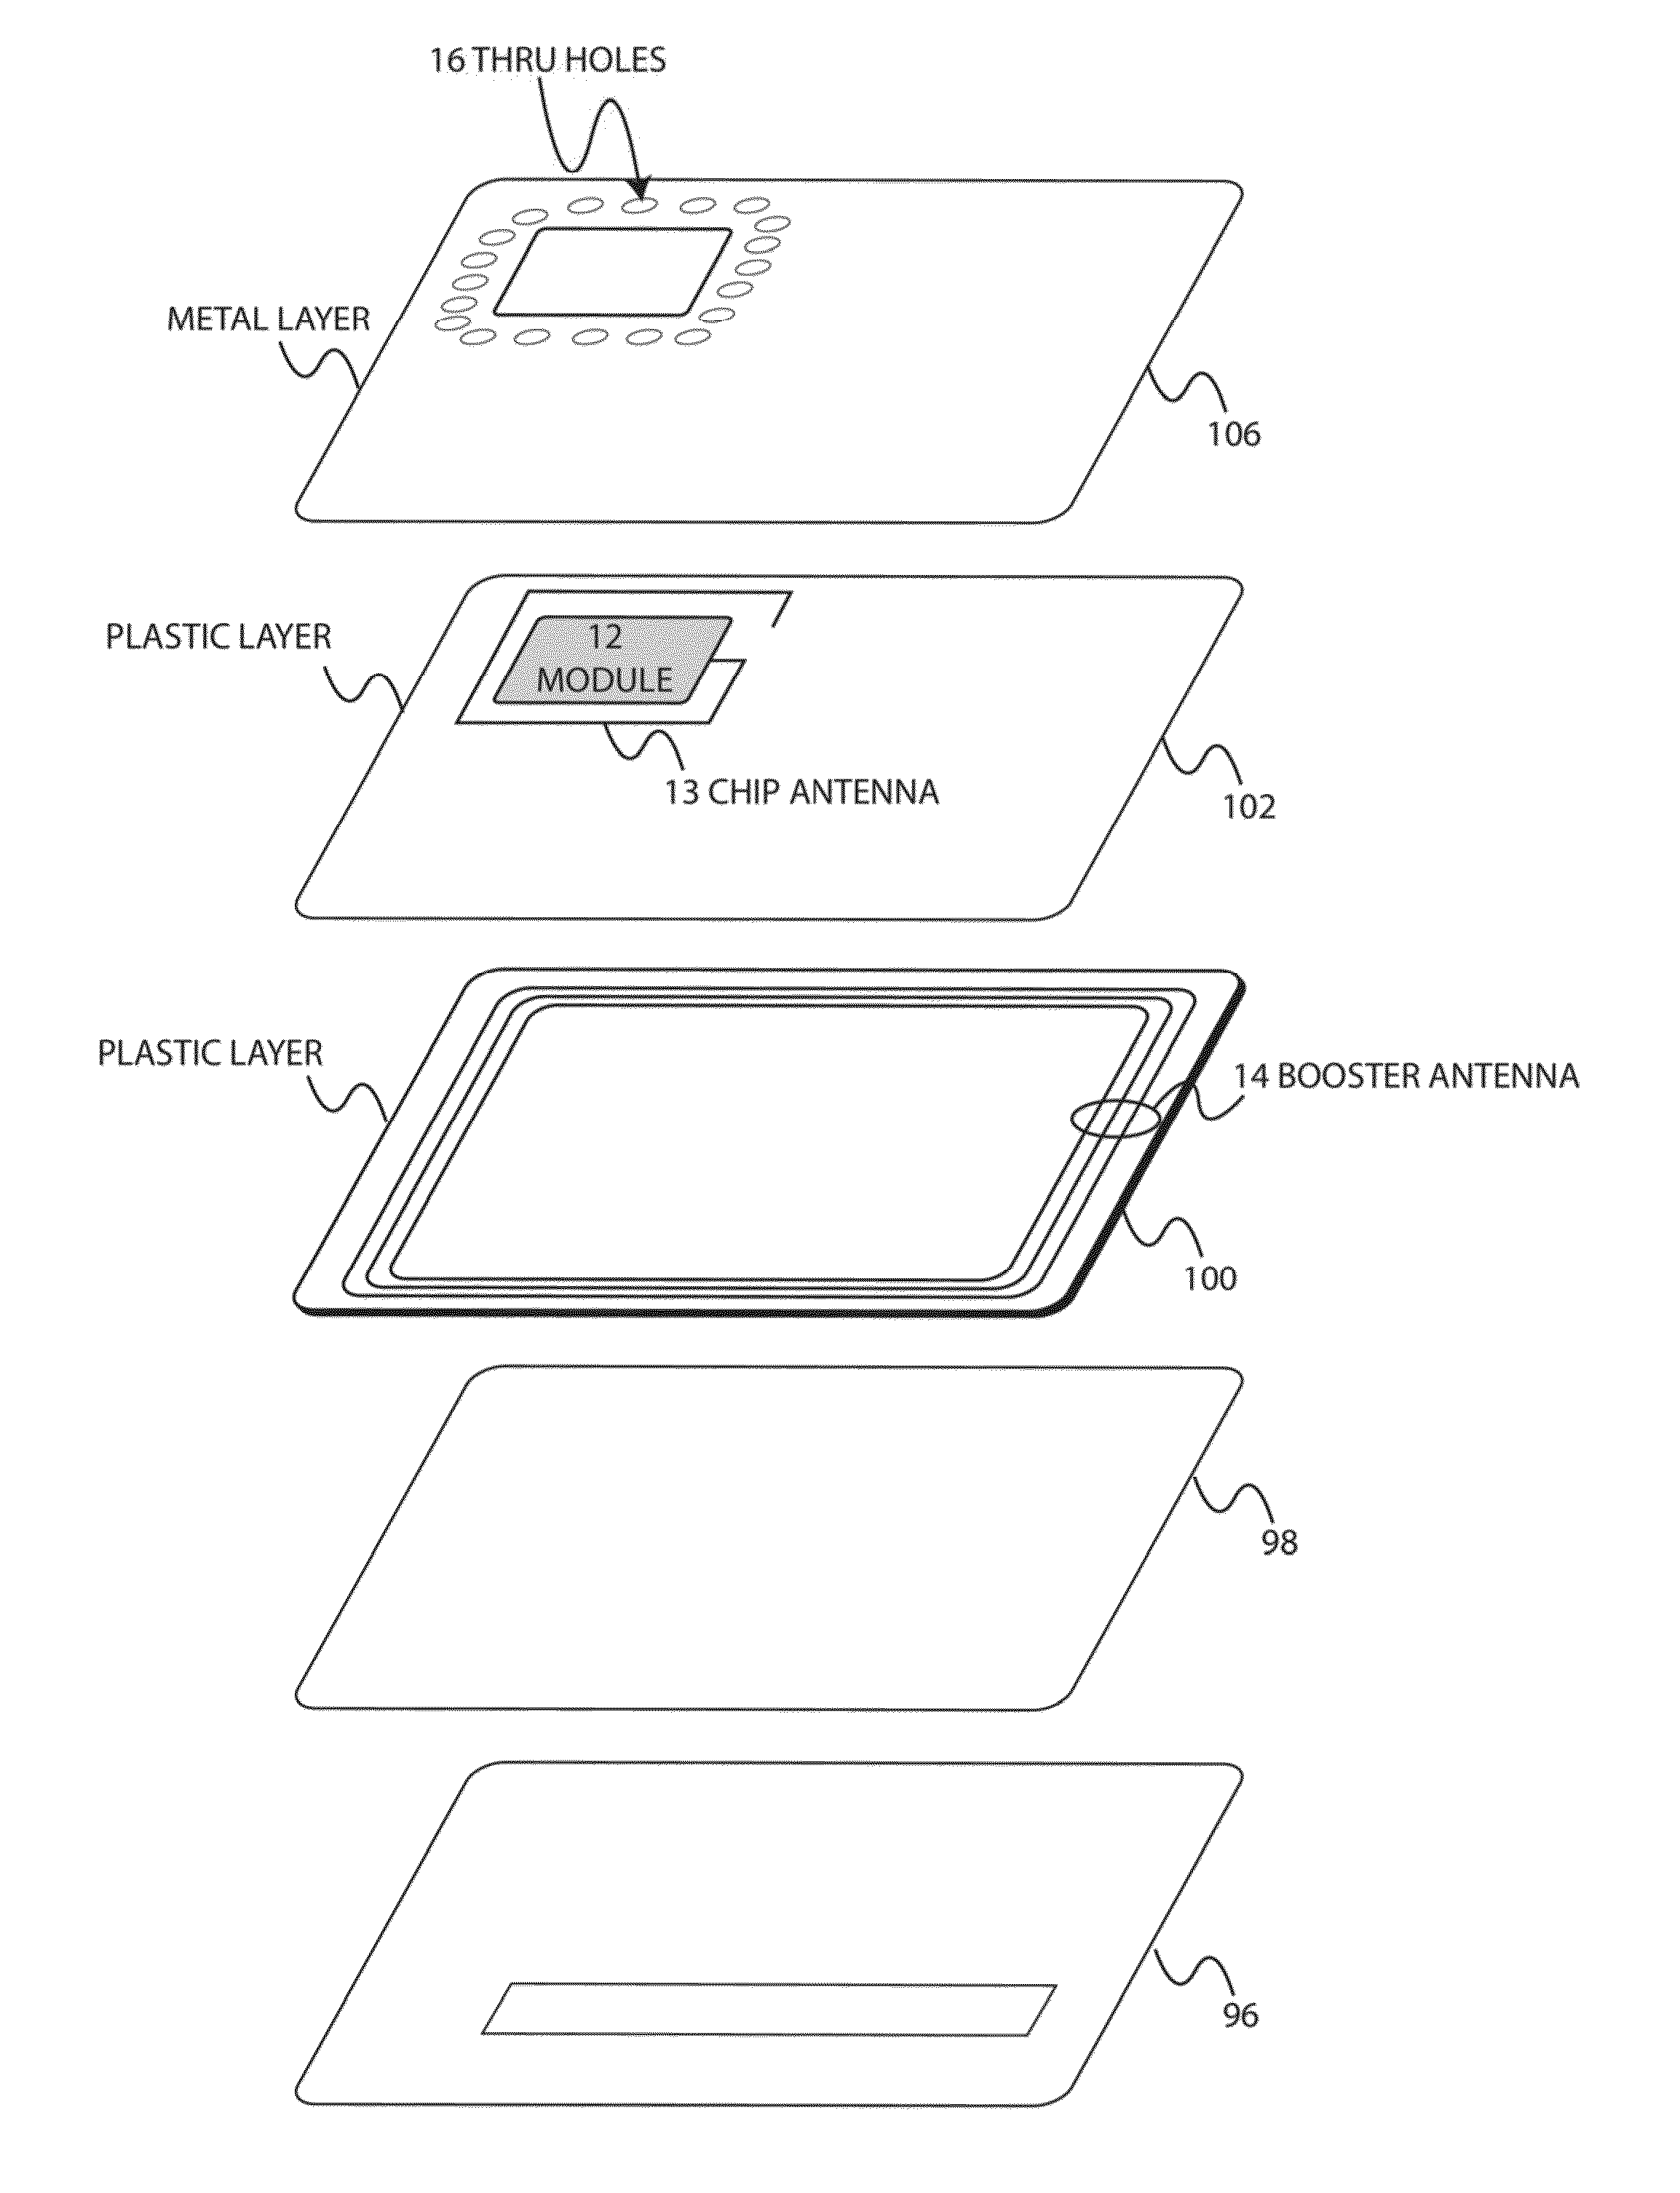 Metal card with radio frequency (RF) transmission capability